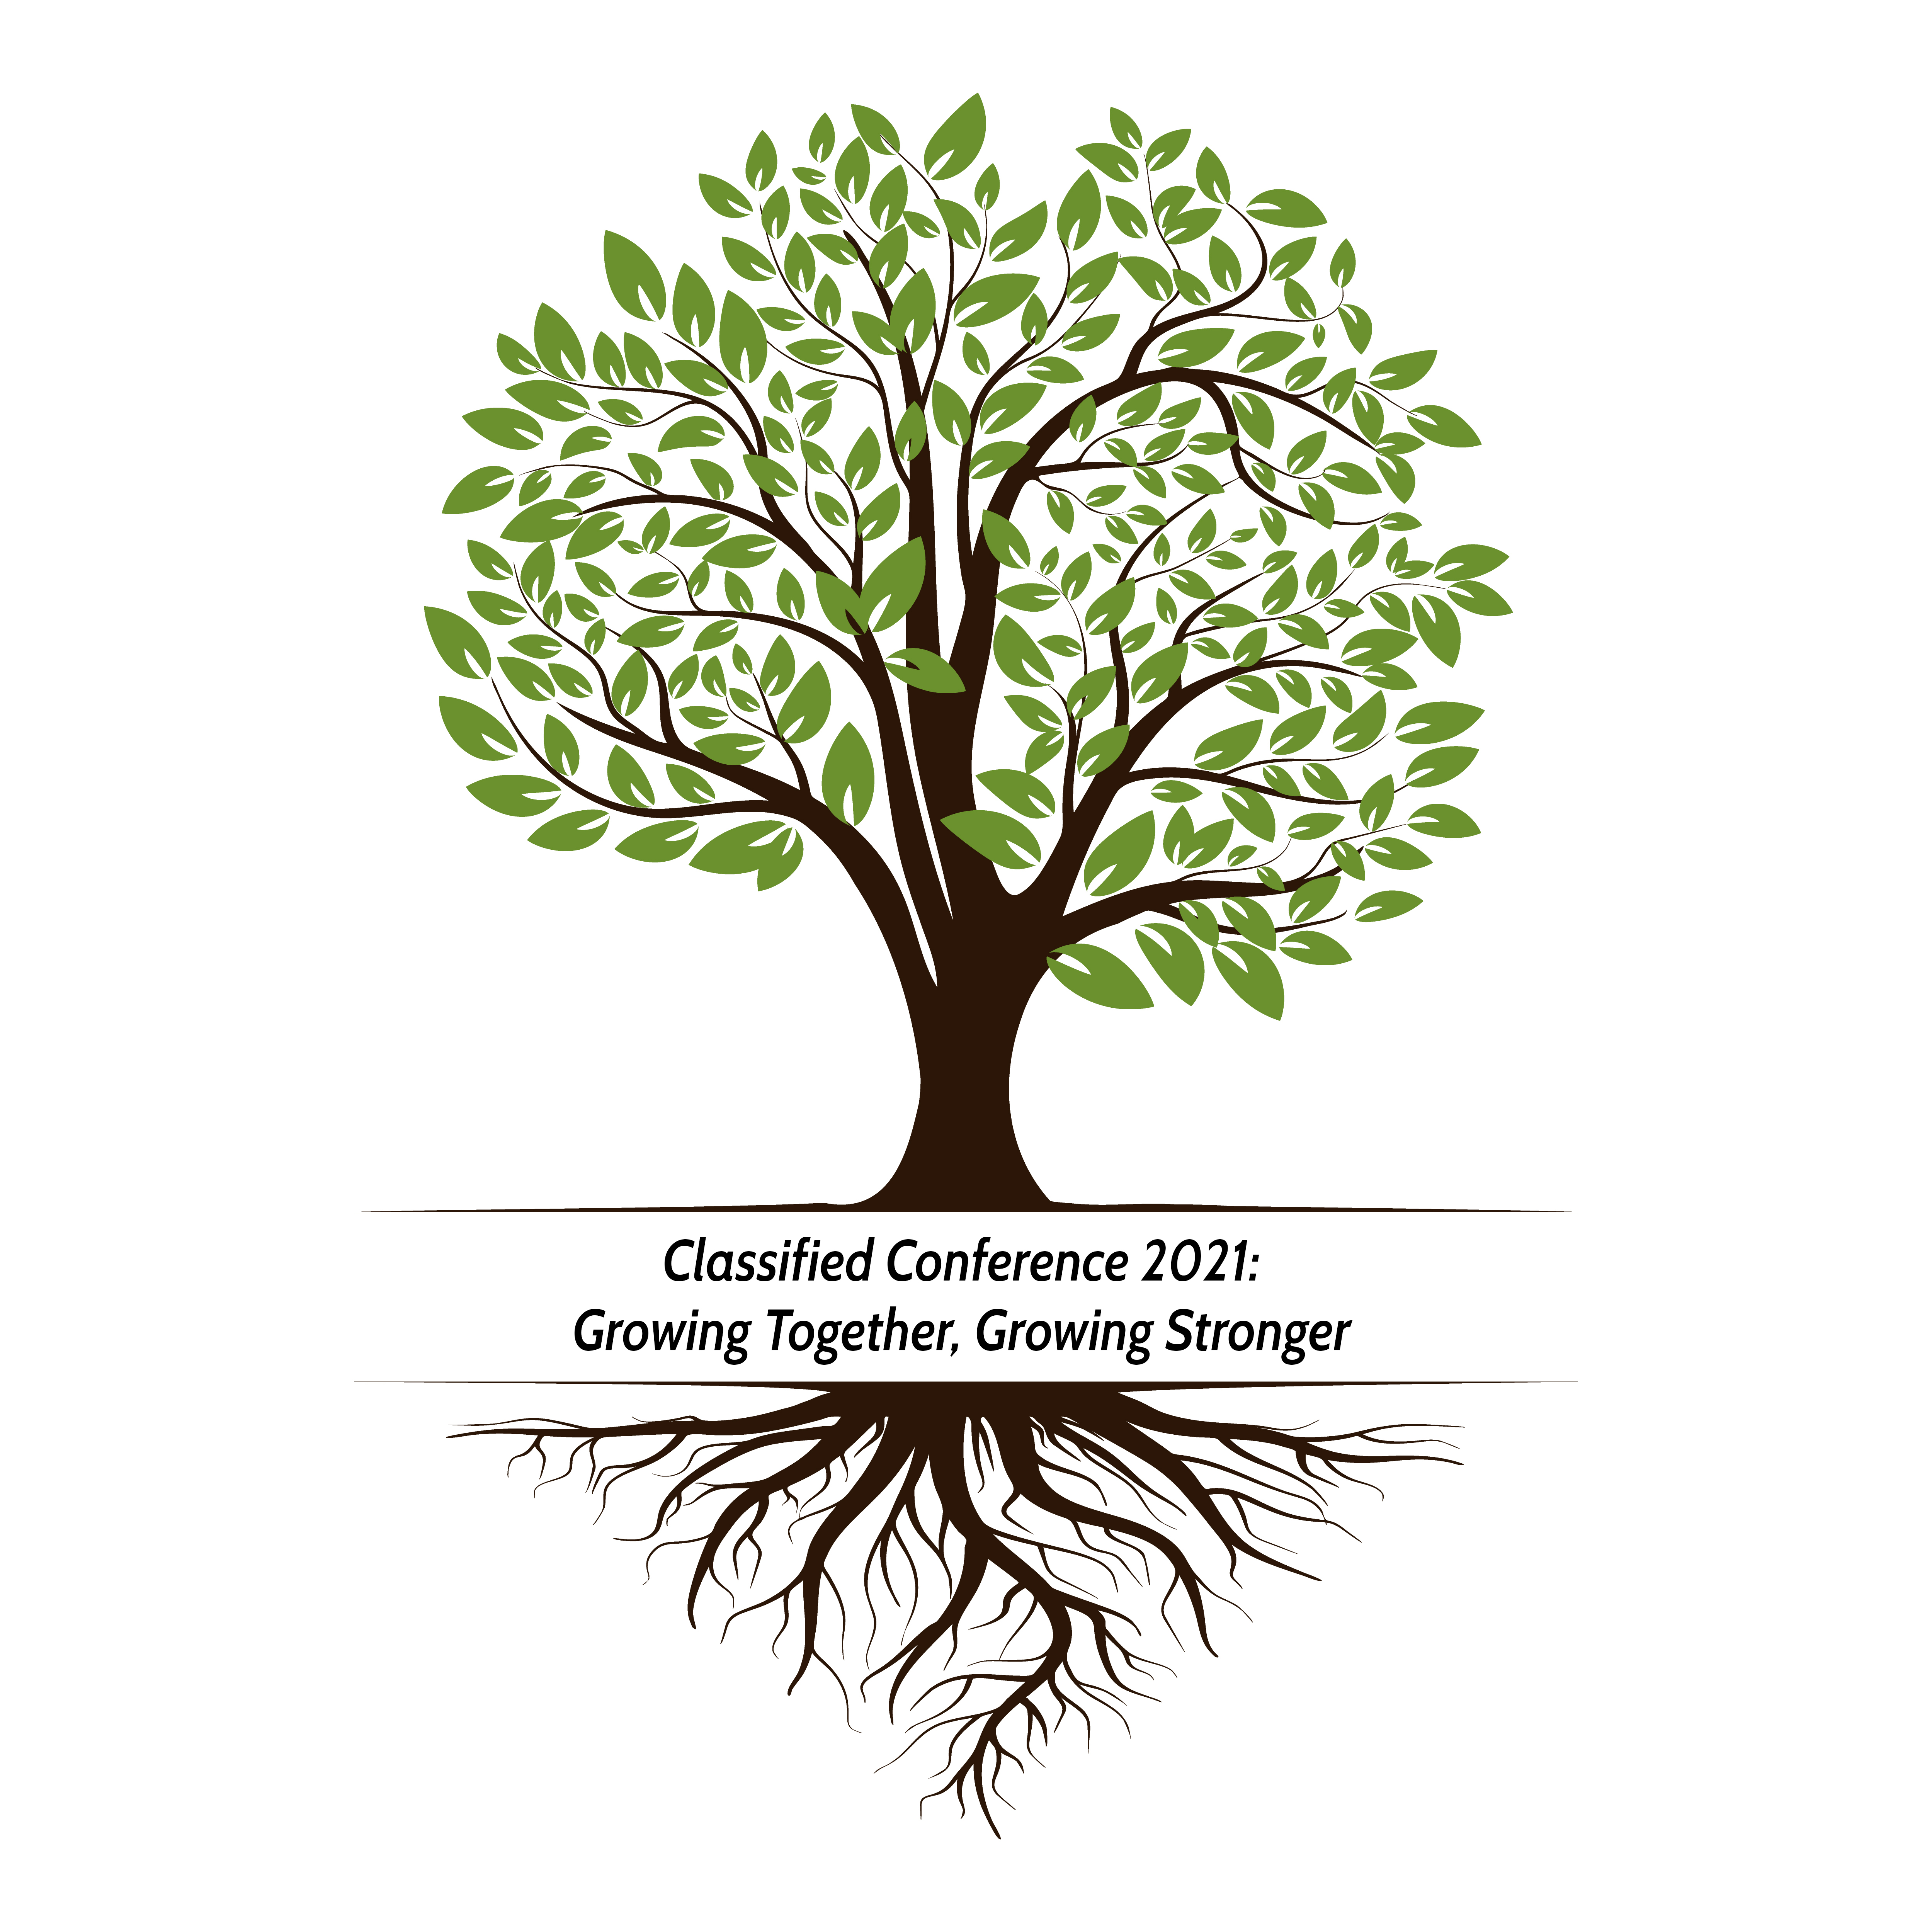 Vector-drawn tree with the wording "Classified Convention 2021: Growing Together, Growing Stronger".